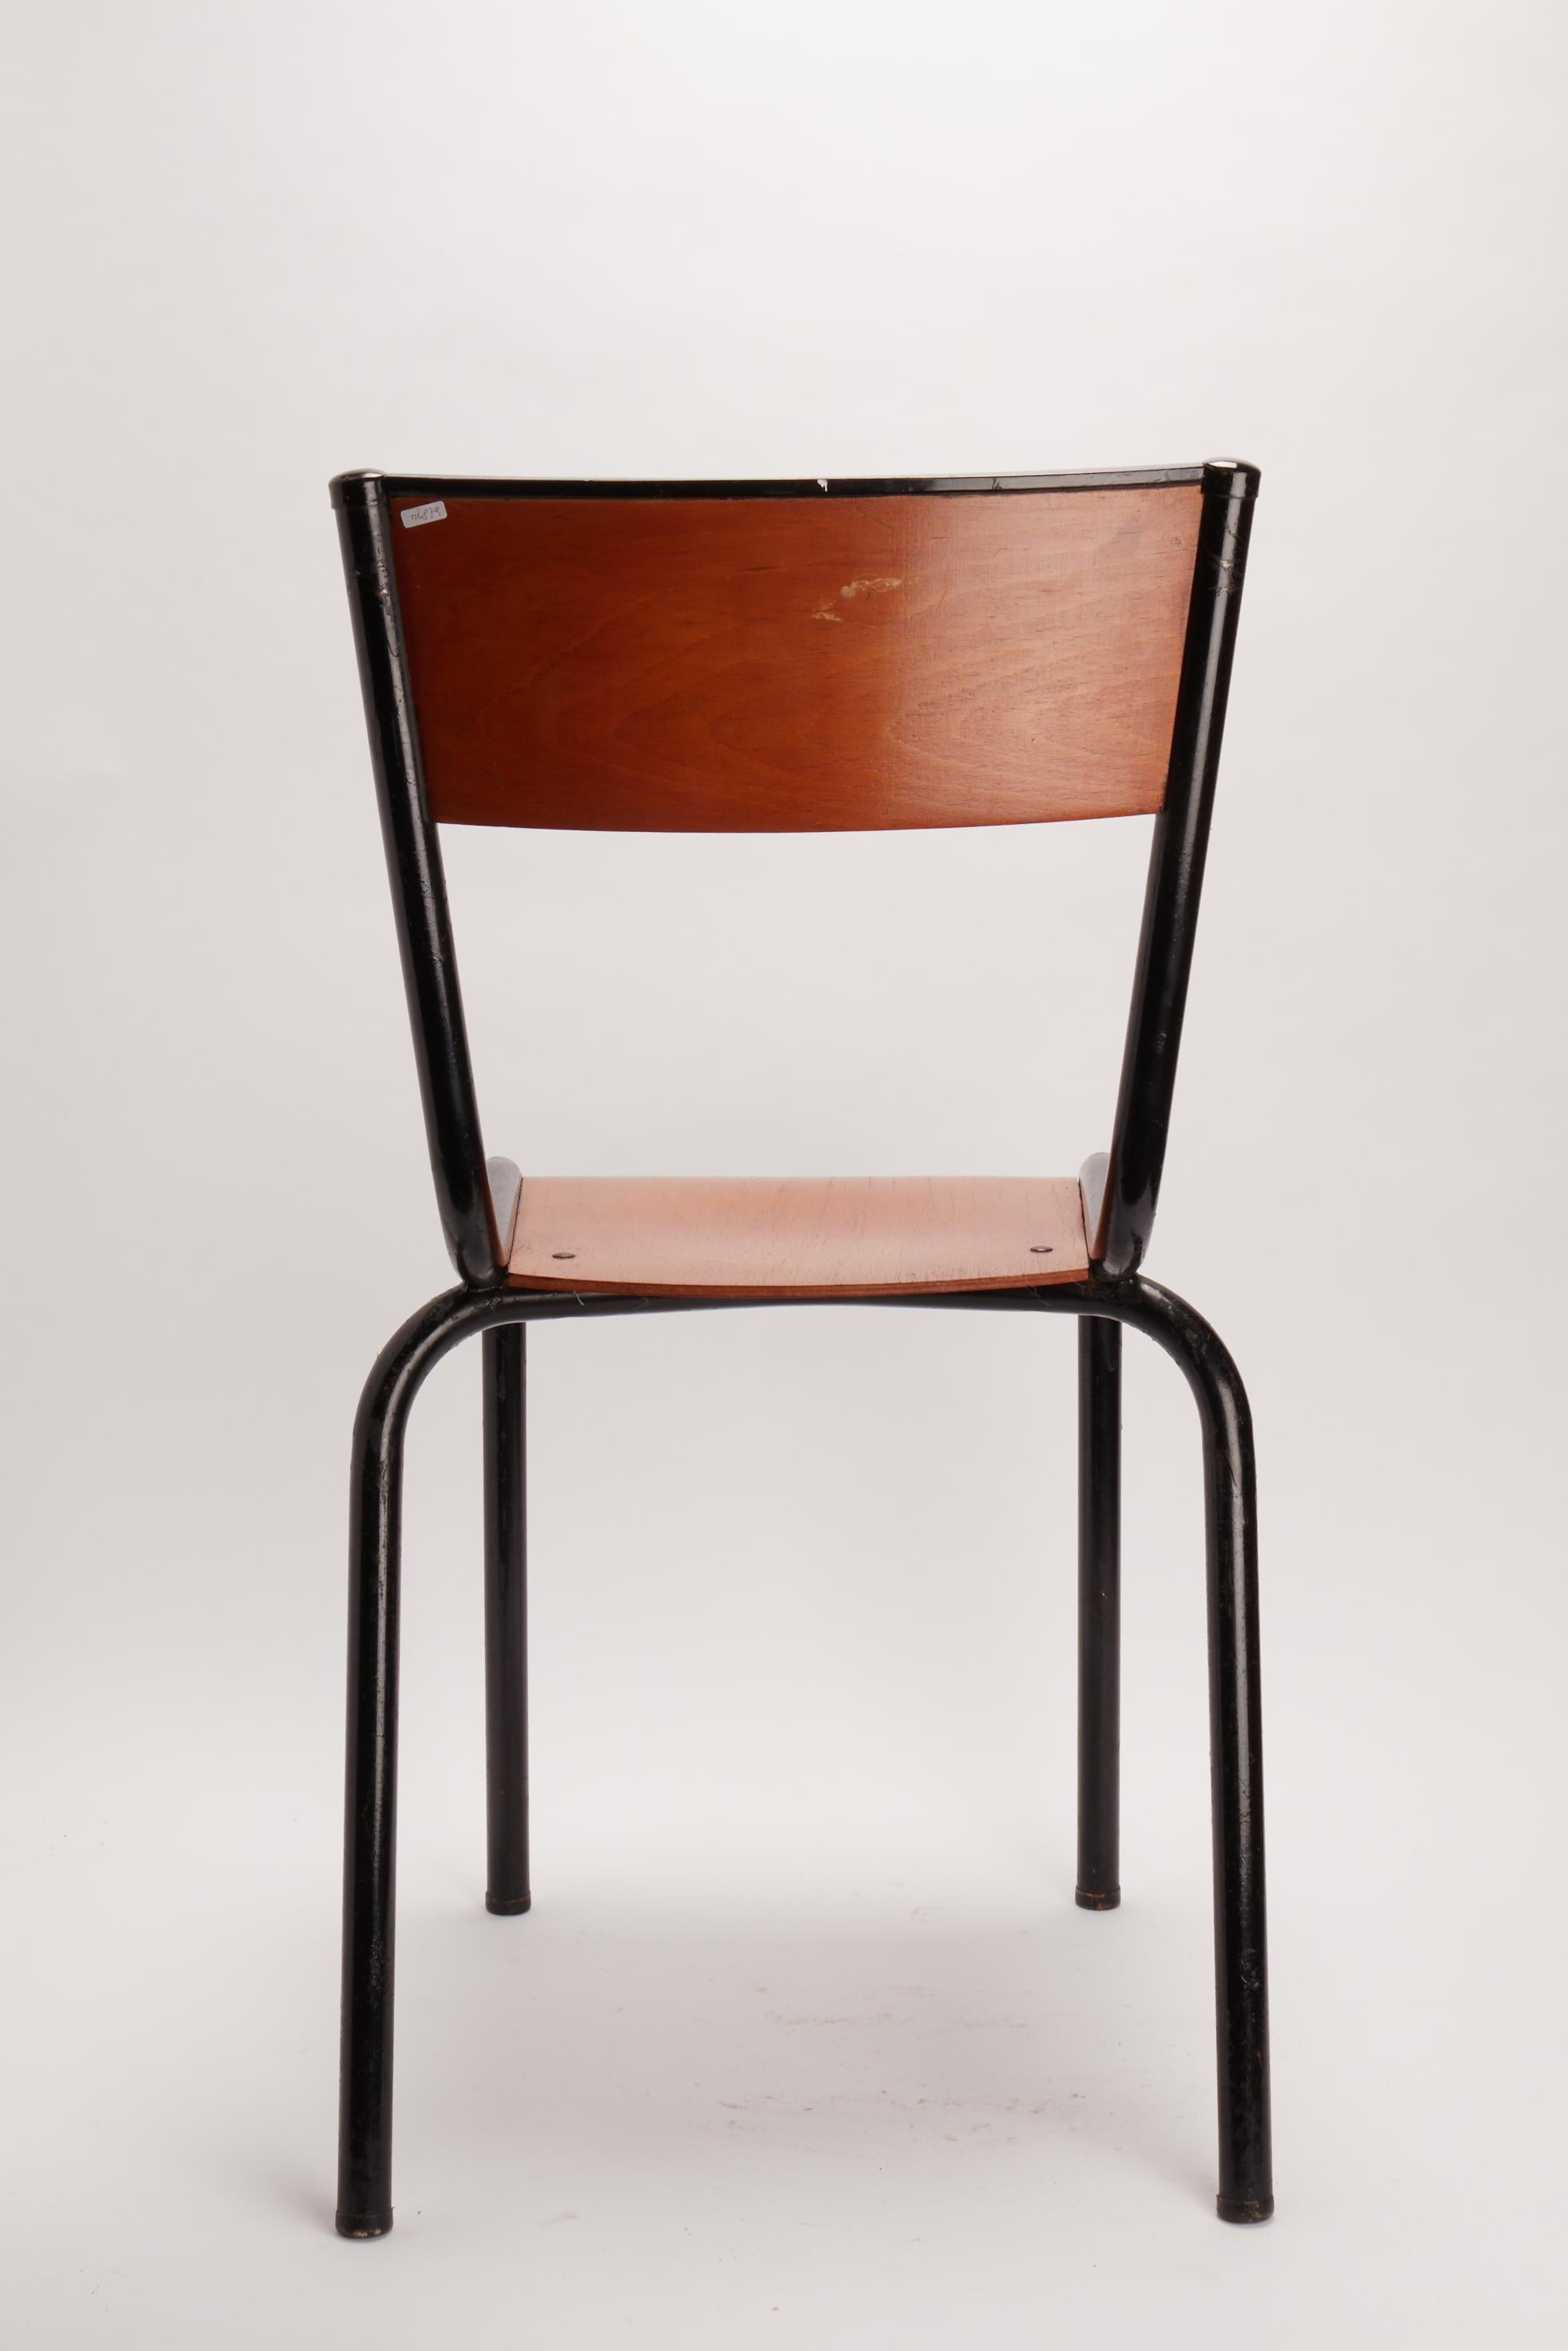 Mullca 511 Chair Designer Gaston Cavaillon, France, 1950 In Excellent Condition For Sale In Milan, IT